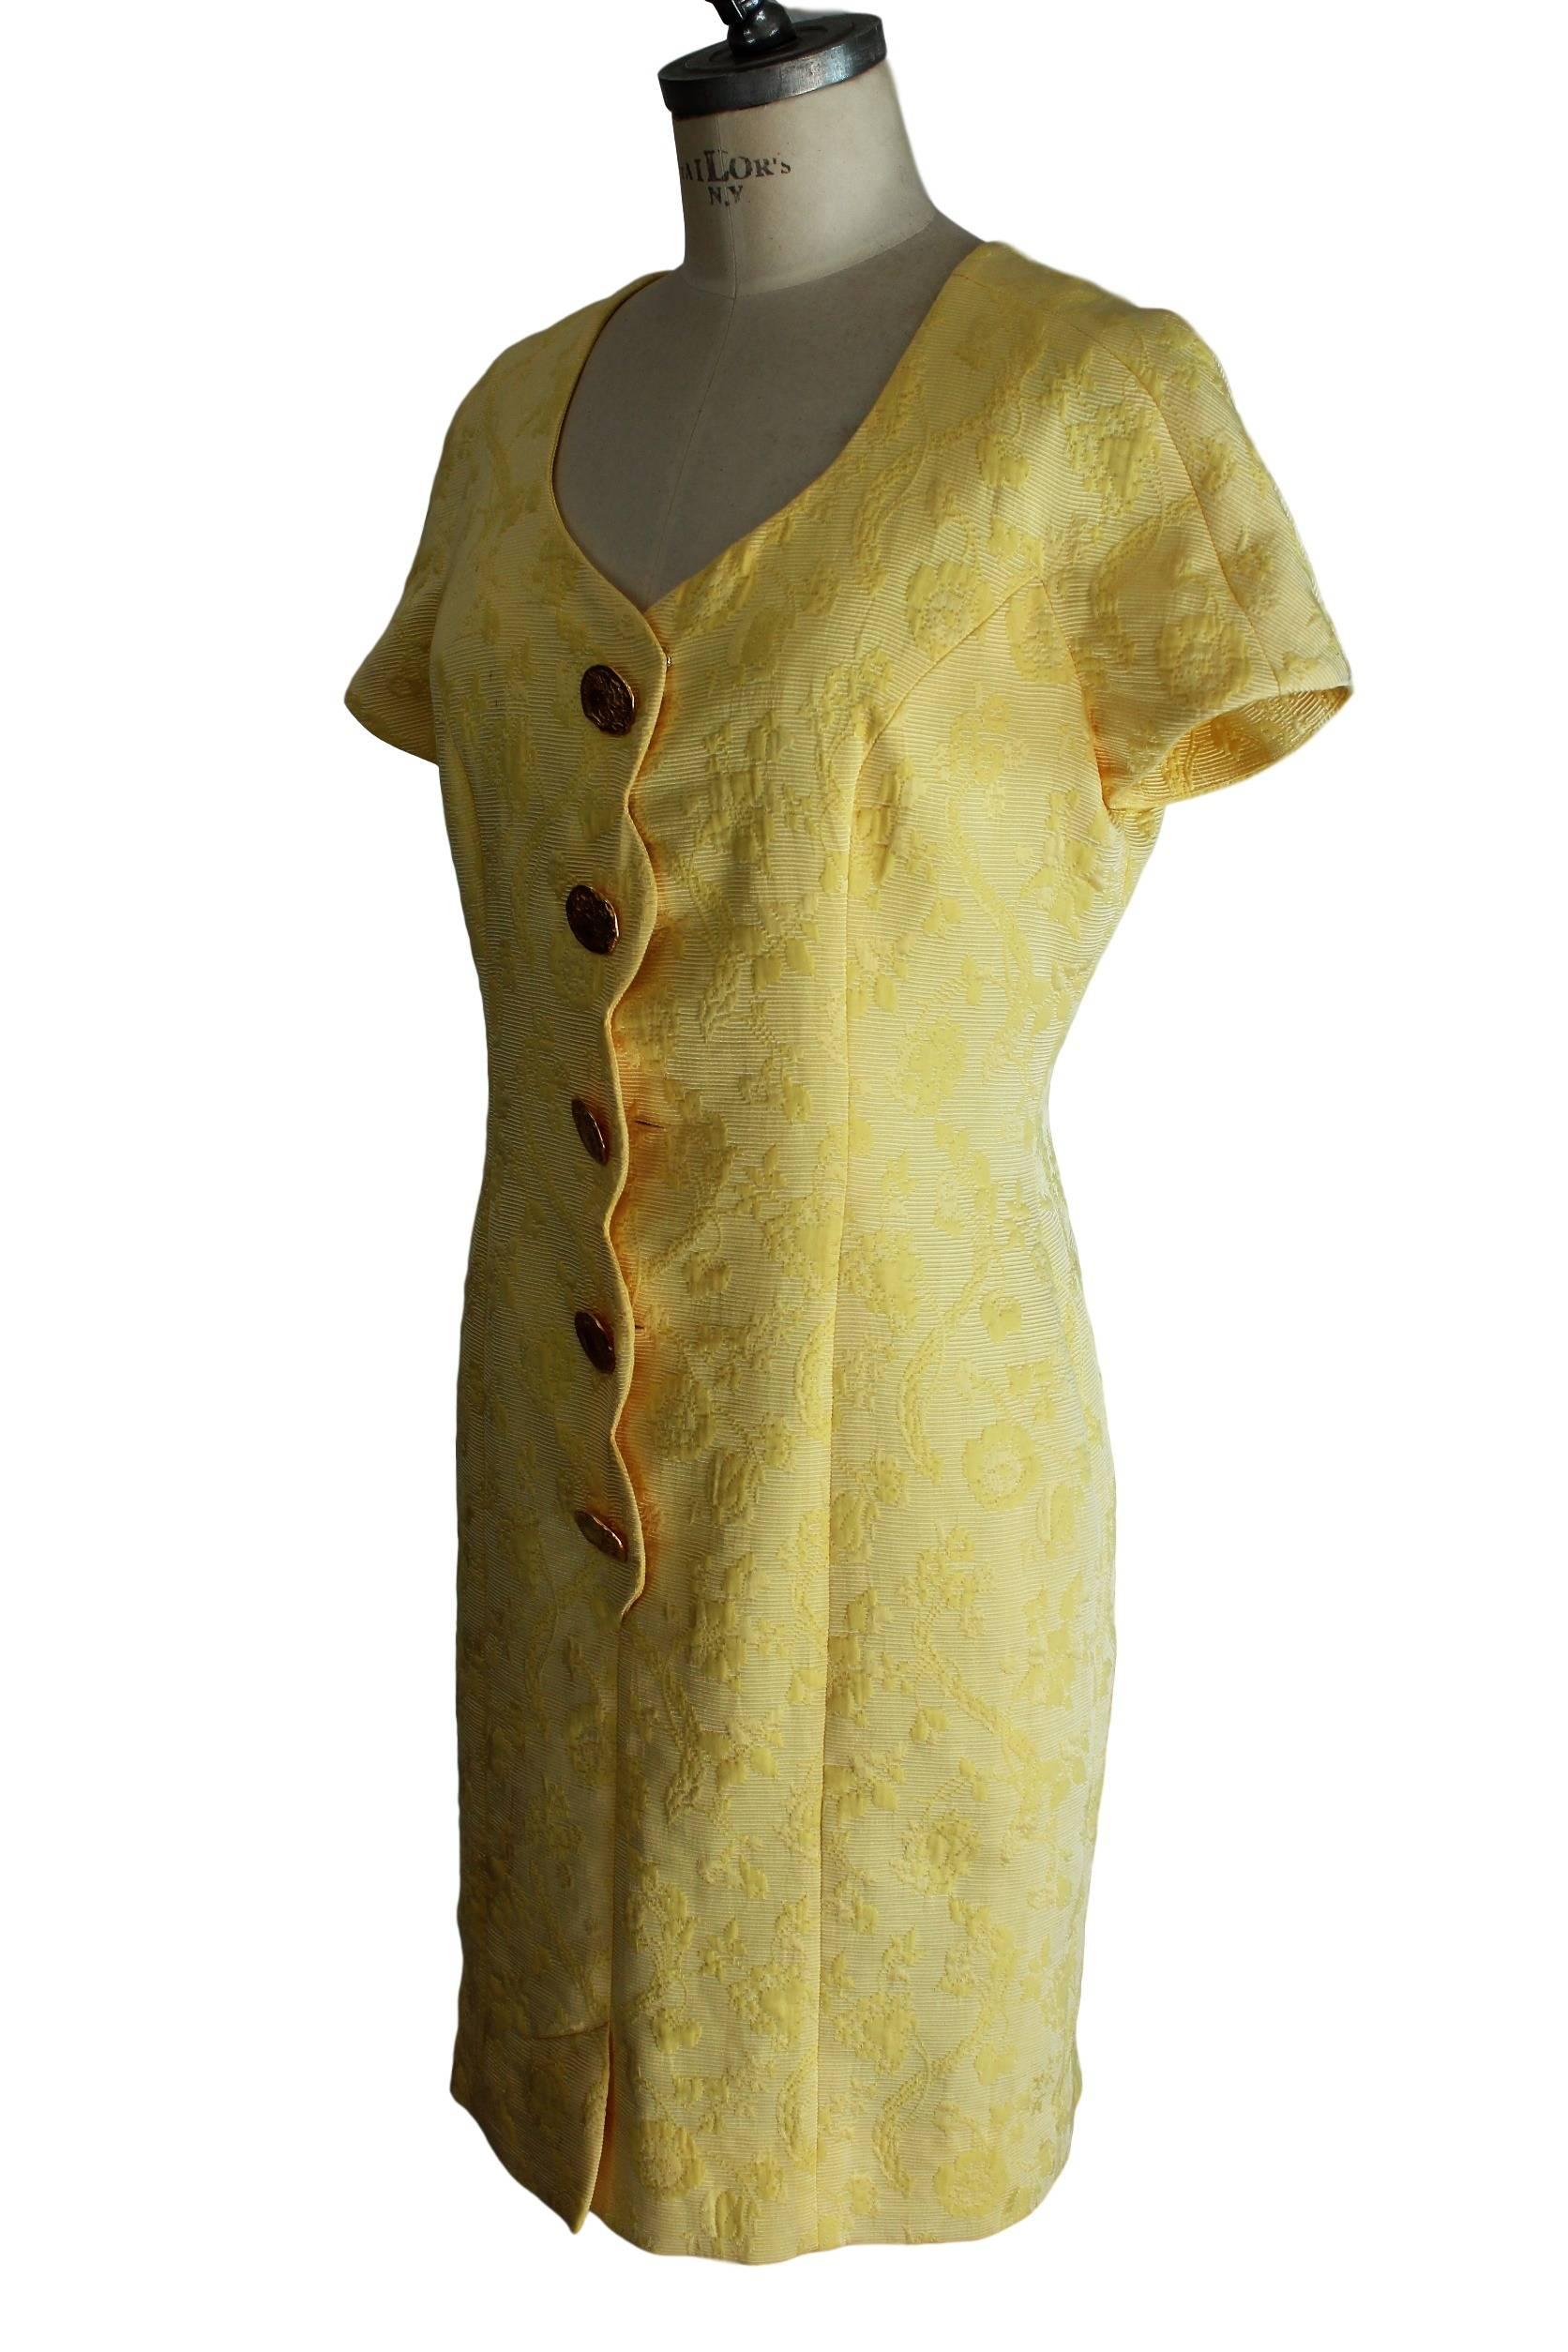 1970s Frank Usher Yellow Cotton Blend Tunic Dress Floral Embossed  In Excellent Condition For Sale In Brindisi, IT